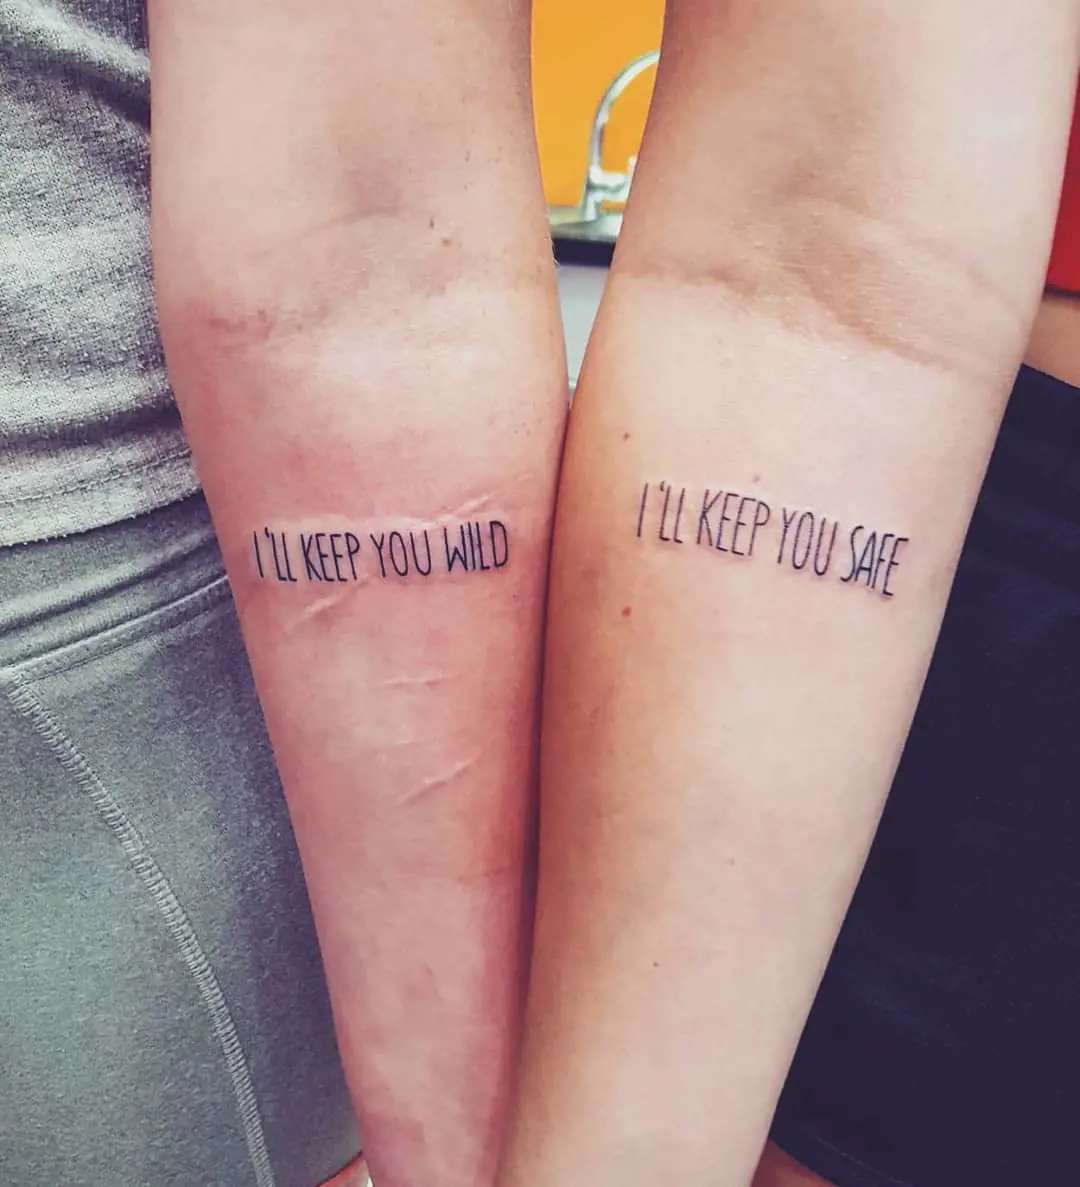 Quotes tattoos can be meaningful as well as silly to celebrate the siblinghood bond. (Photo By: @julietavanessa)